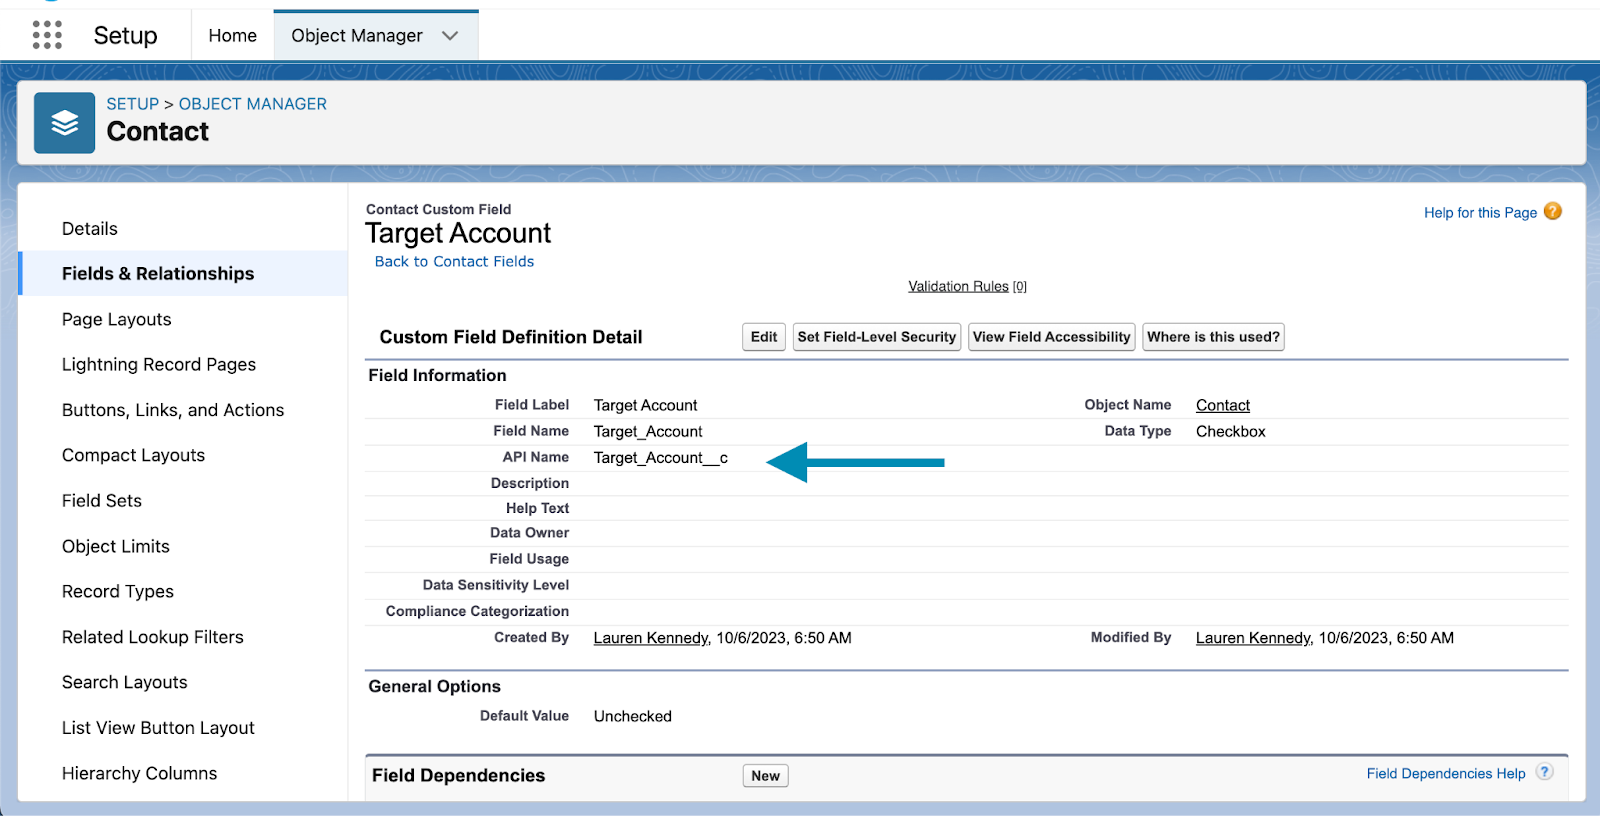 Setting the API Name on the Contact field in Salesforce